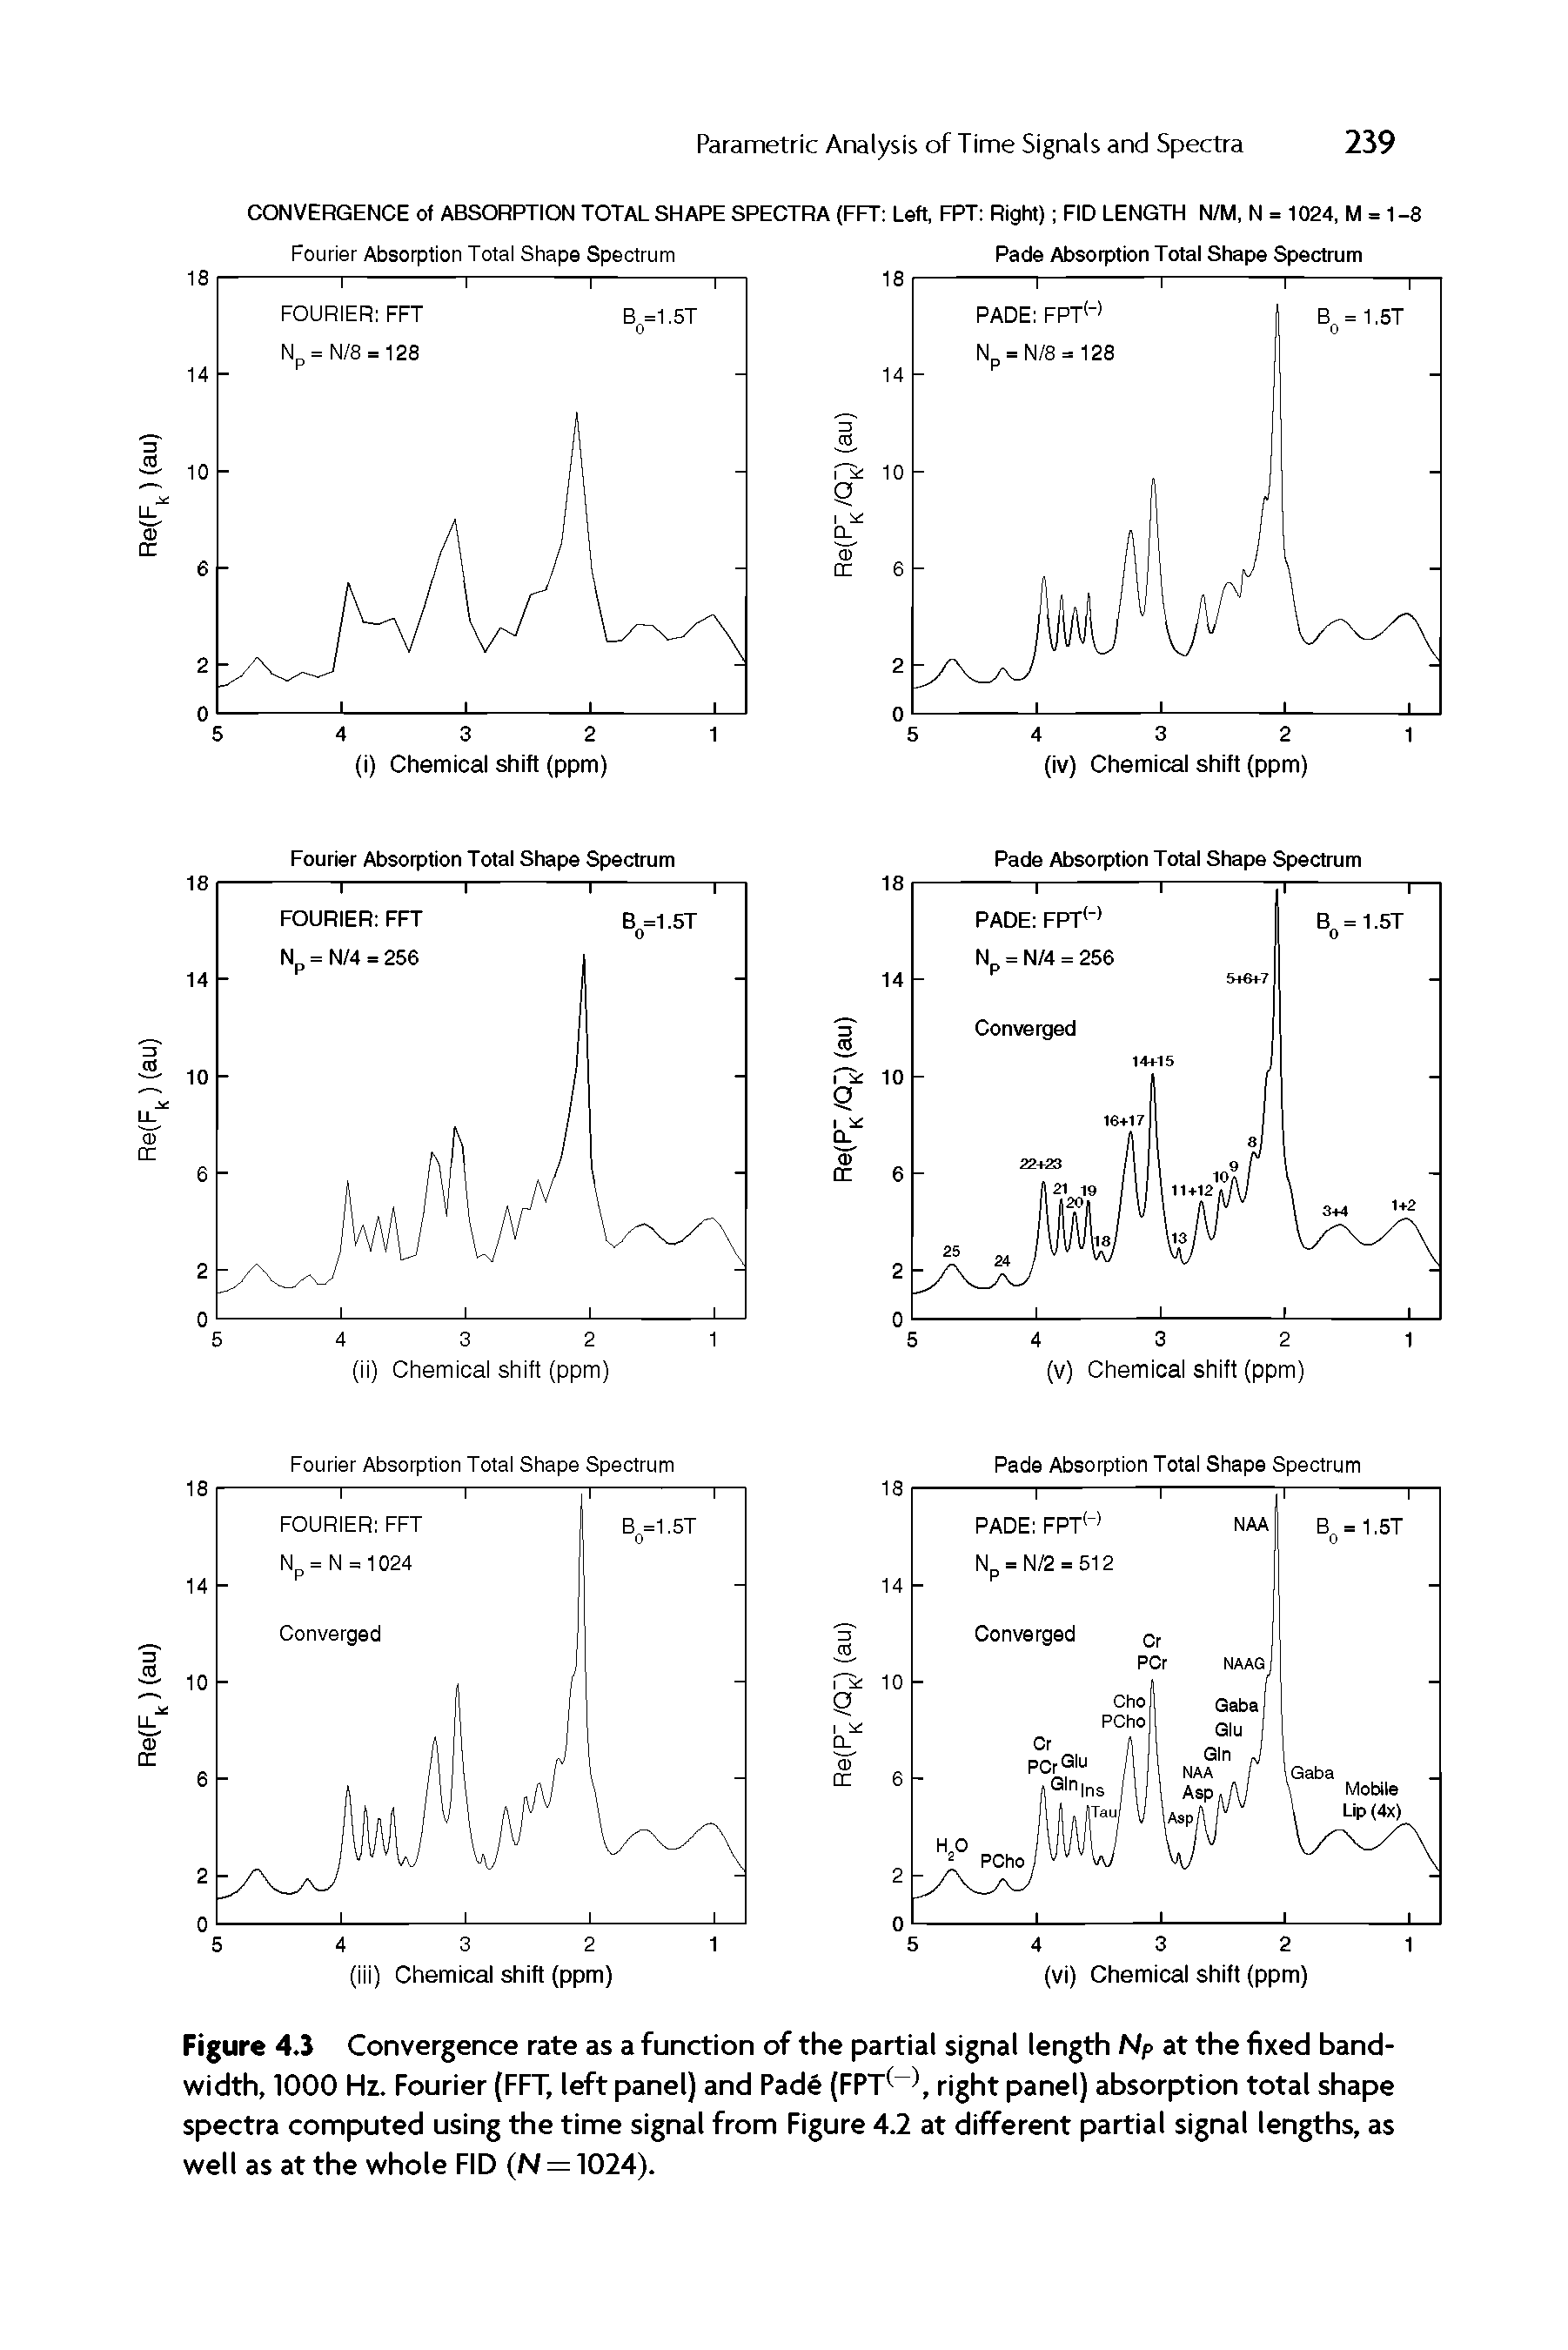 Figure 4.3 Convergence rate as a function of the partial signal length Np at the fixed band-width, 1000 Hz. Fourier (FFT, left panel) and Pade (FPT right panel) absorption total shape spectra computed using the time signal from Figure 4.2 at different partial signal lengths, as well as at the whole FID (N = 1024).